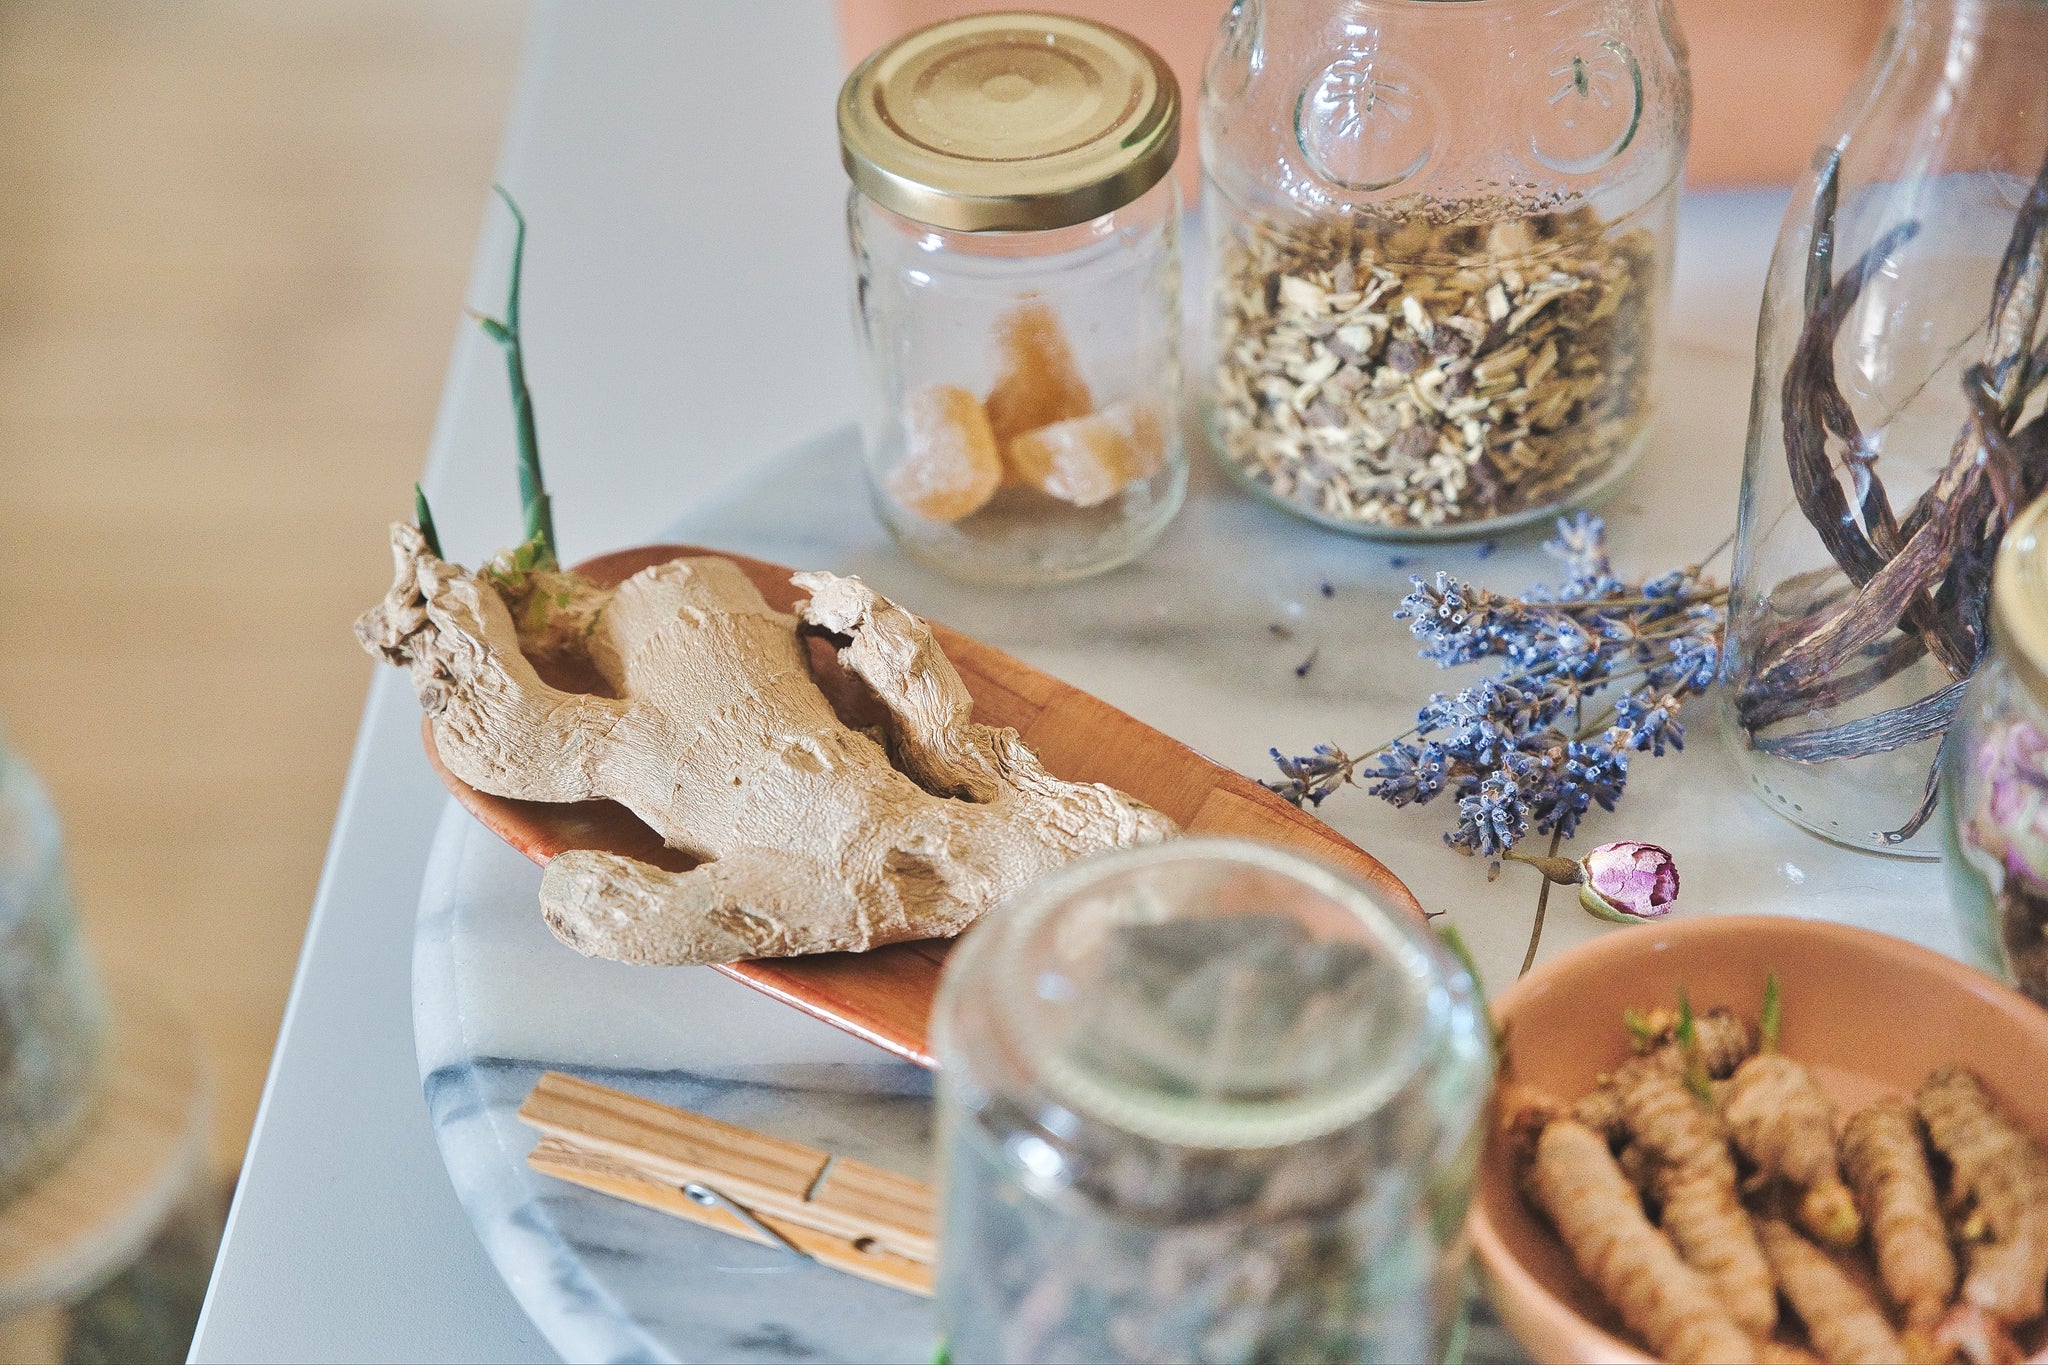 Intro to Herbal Medicine Class - October 26th